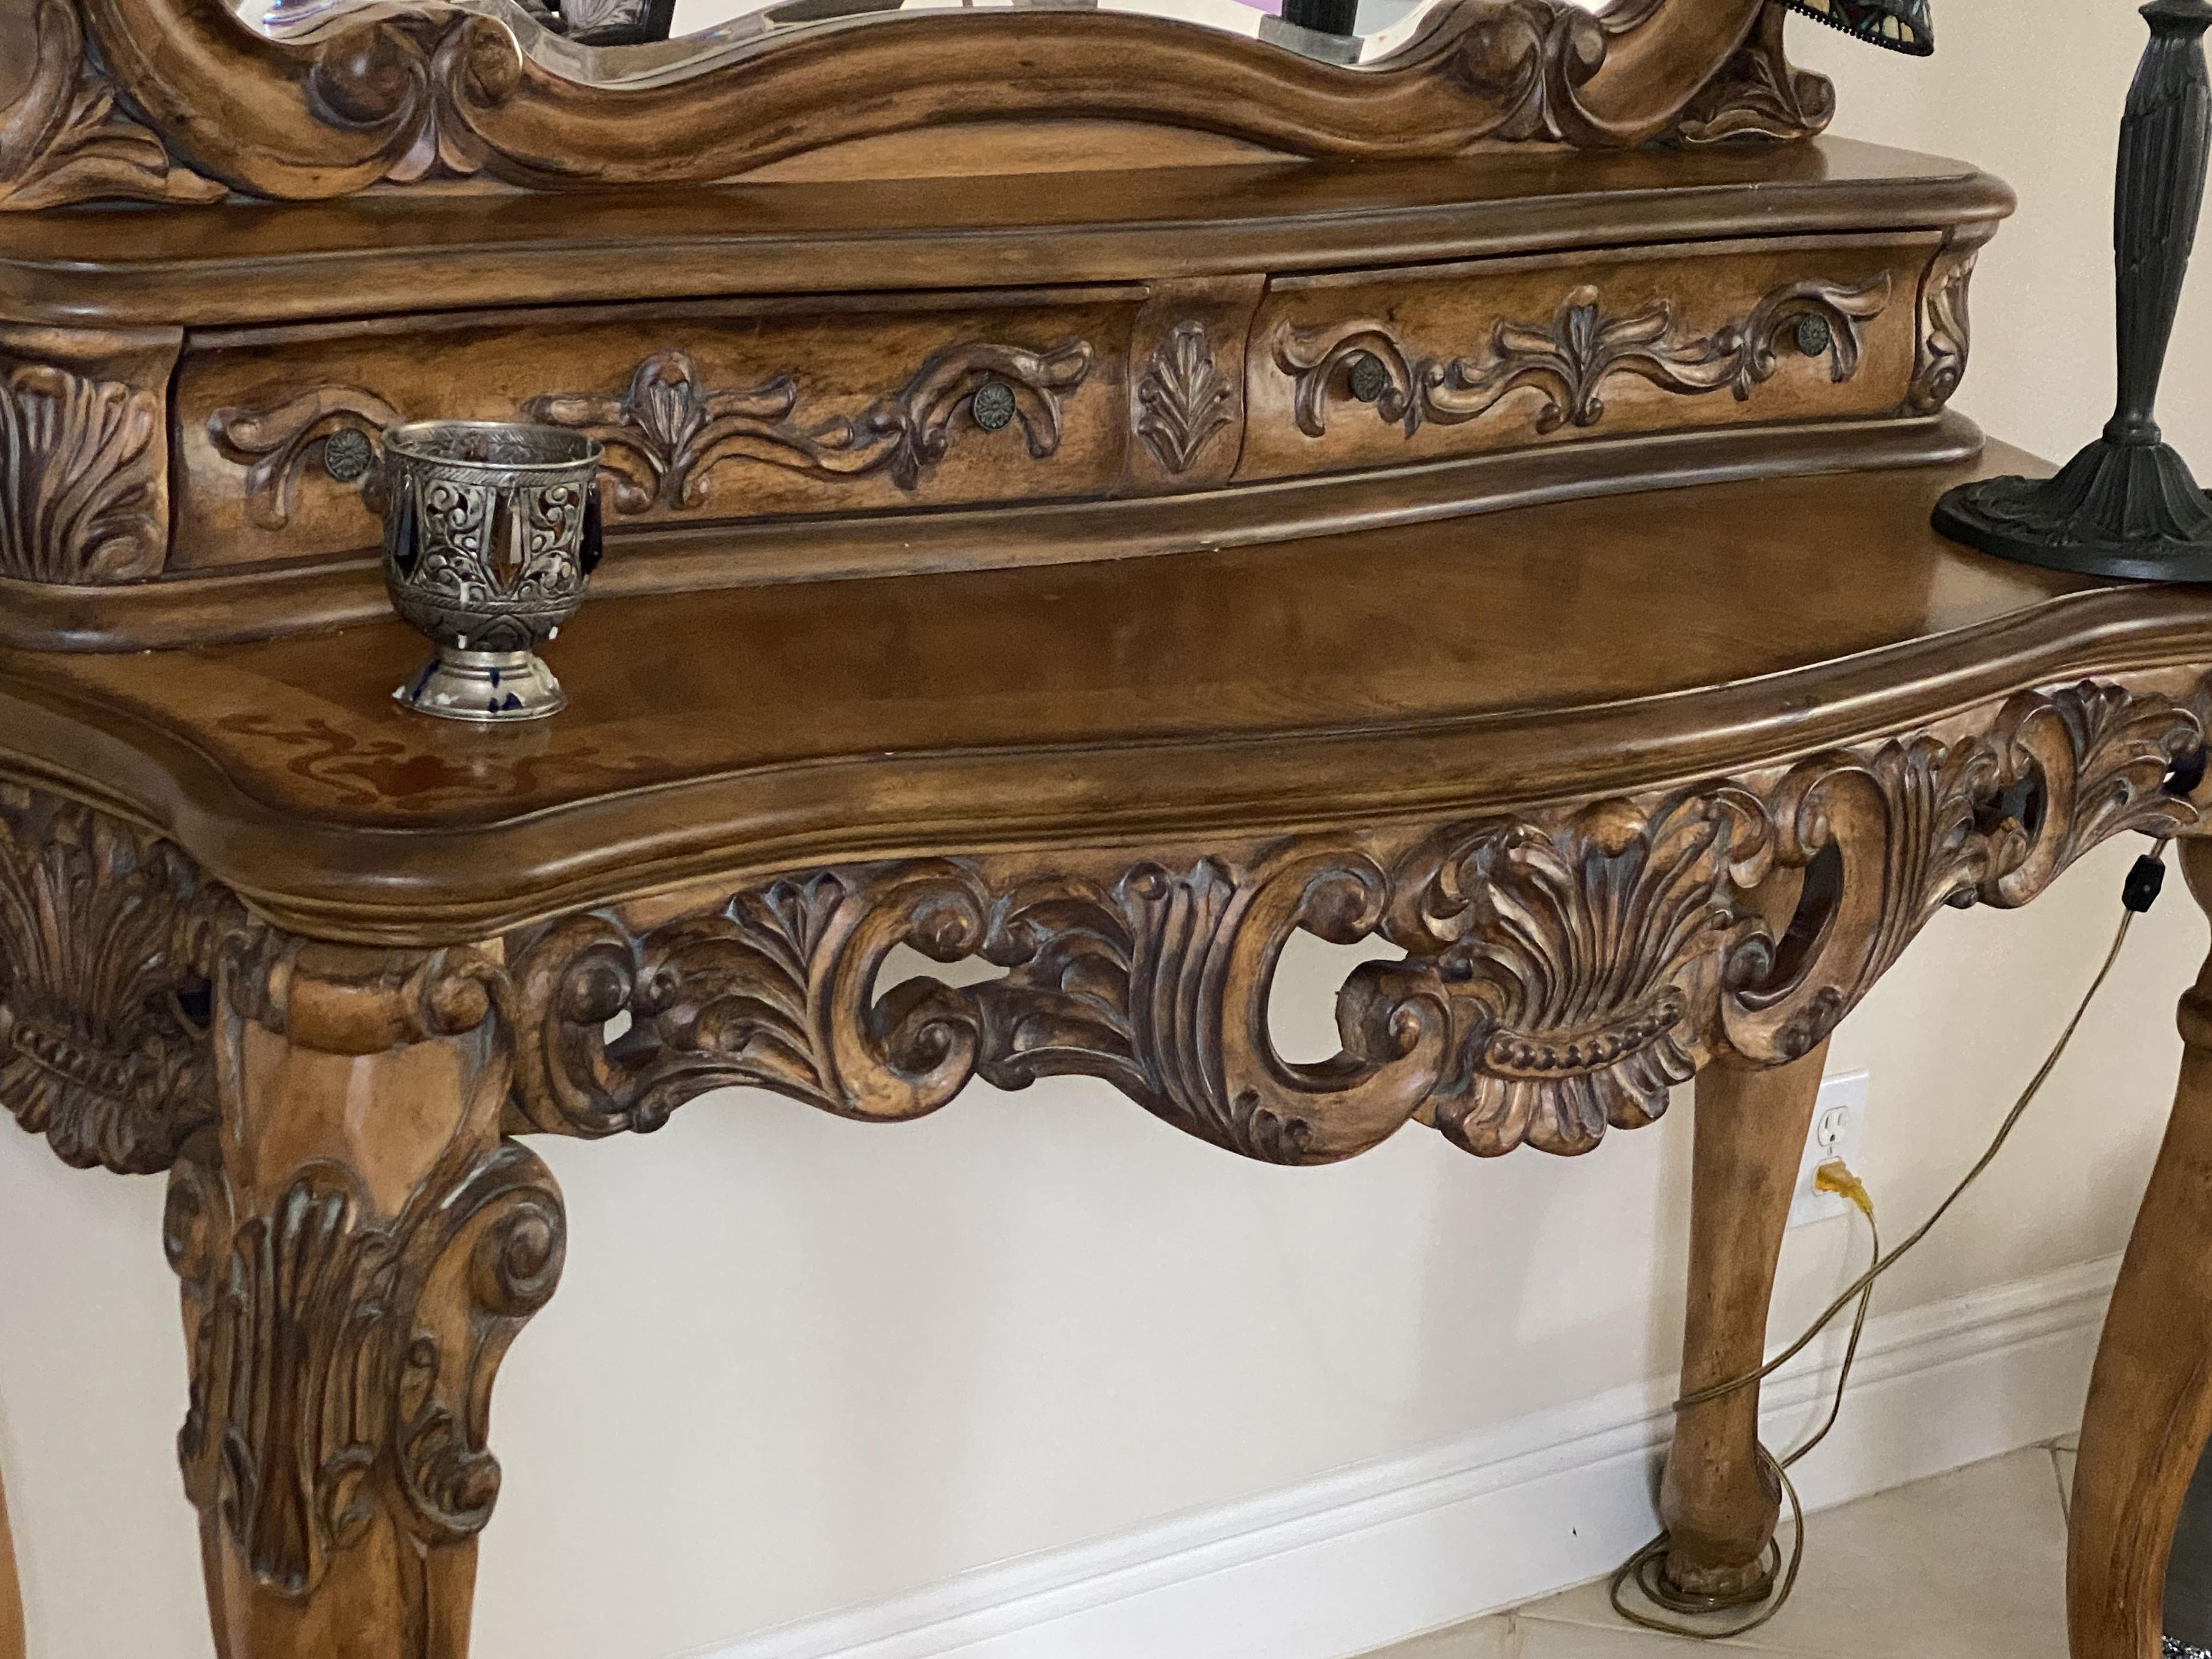 53" Ornate Carved Wood Claw Foot Entry Console/Desk with Mirror and Two Felt Lined Draws